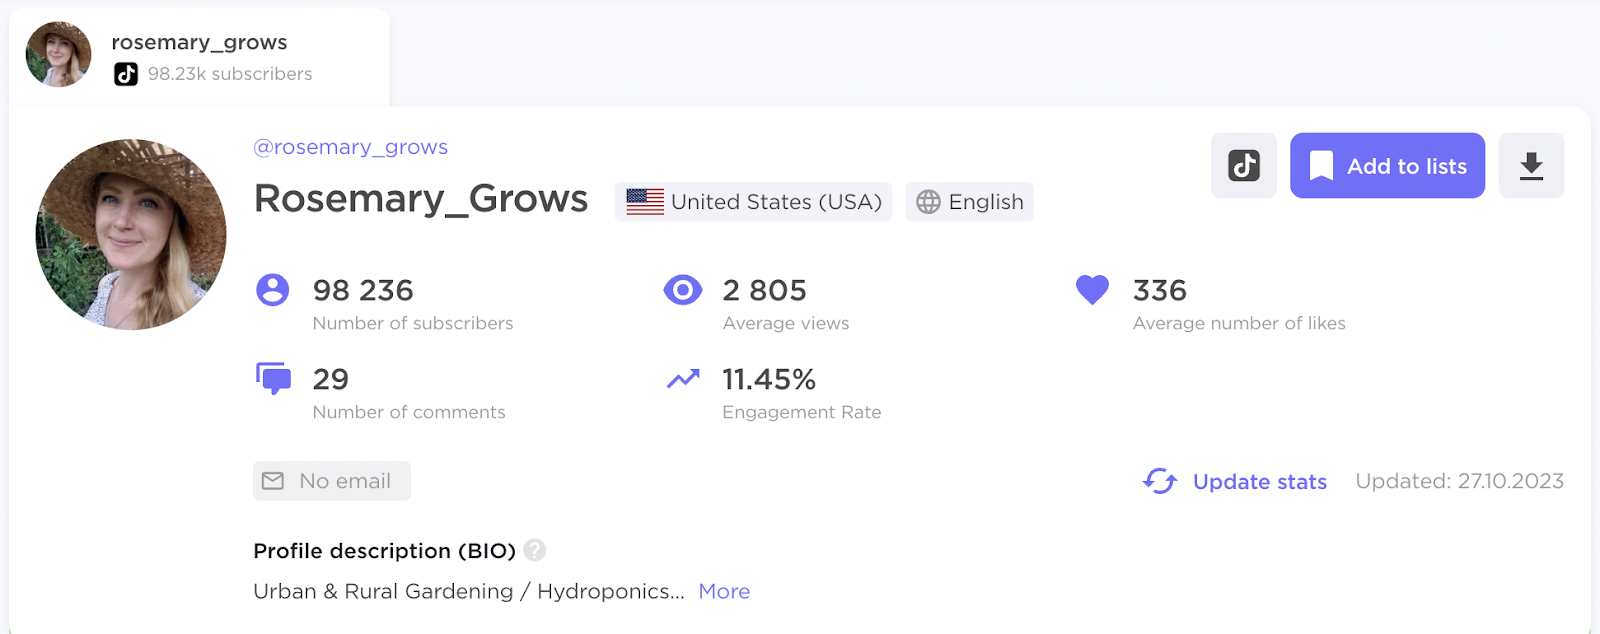 Rosemary_Grows's profile on Influencer Analytics